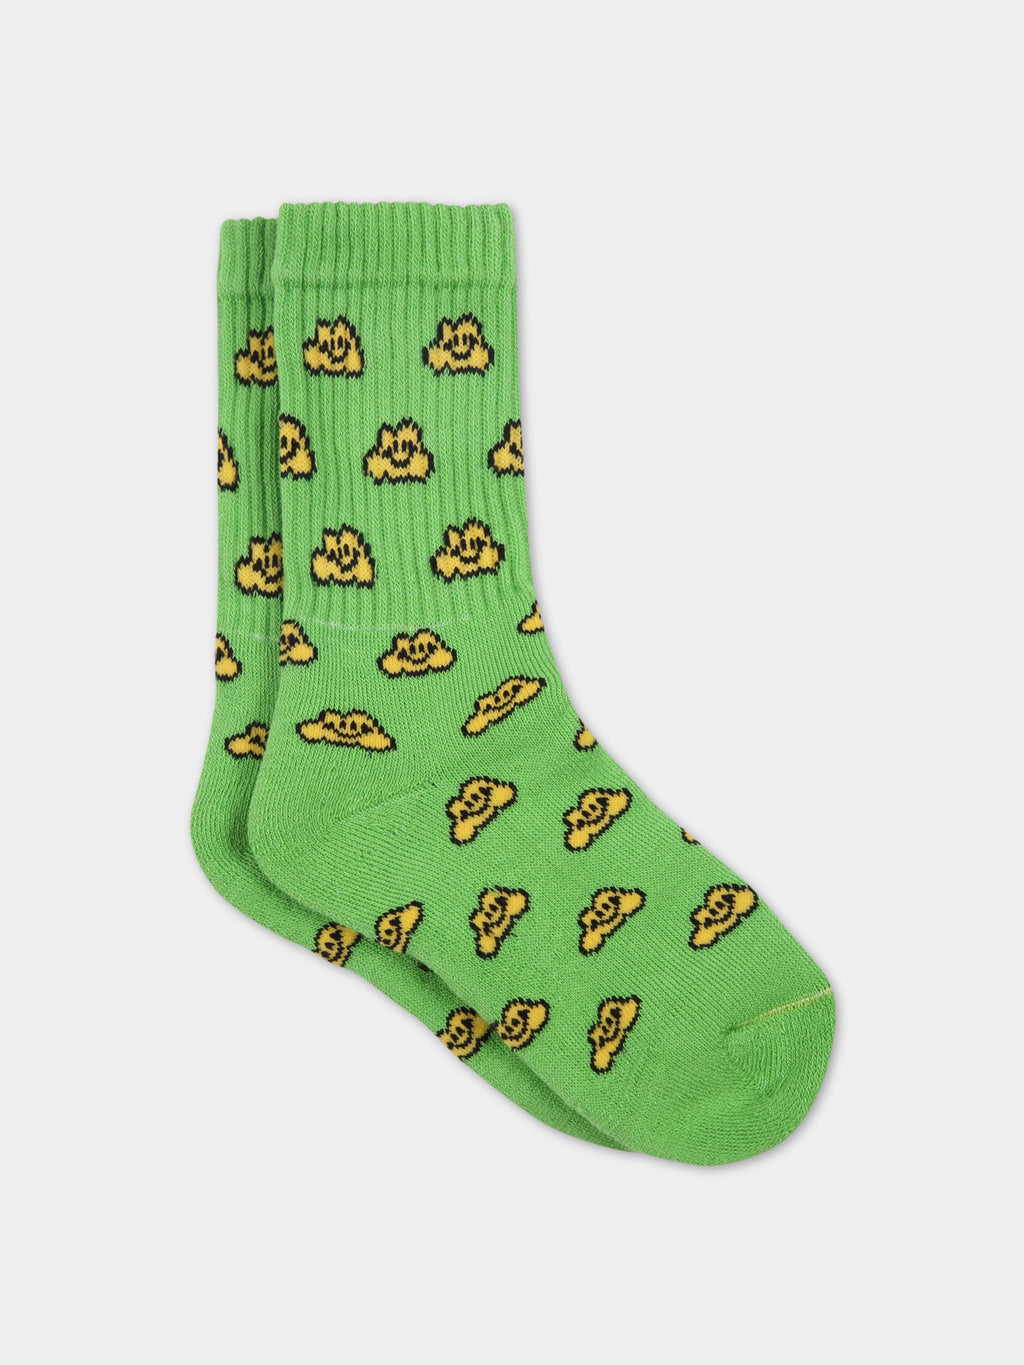 Green socks for kids with yellow clouds